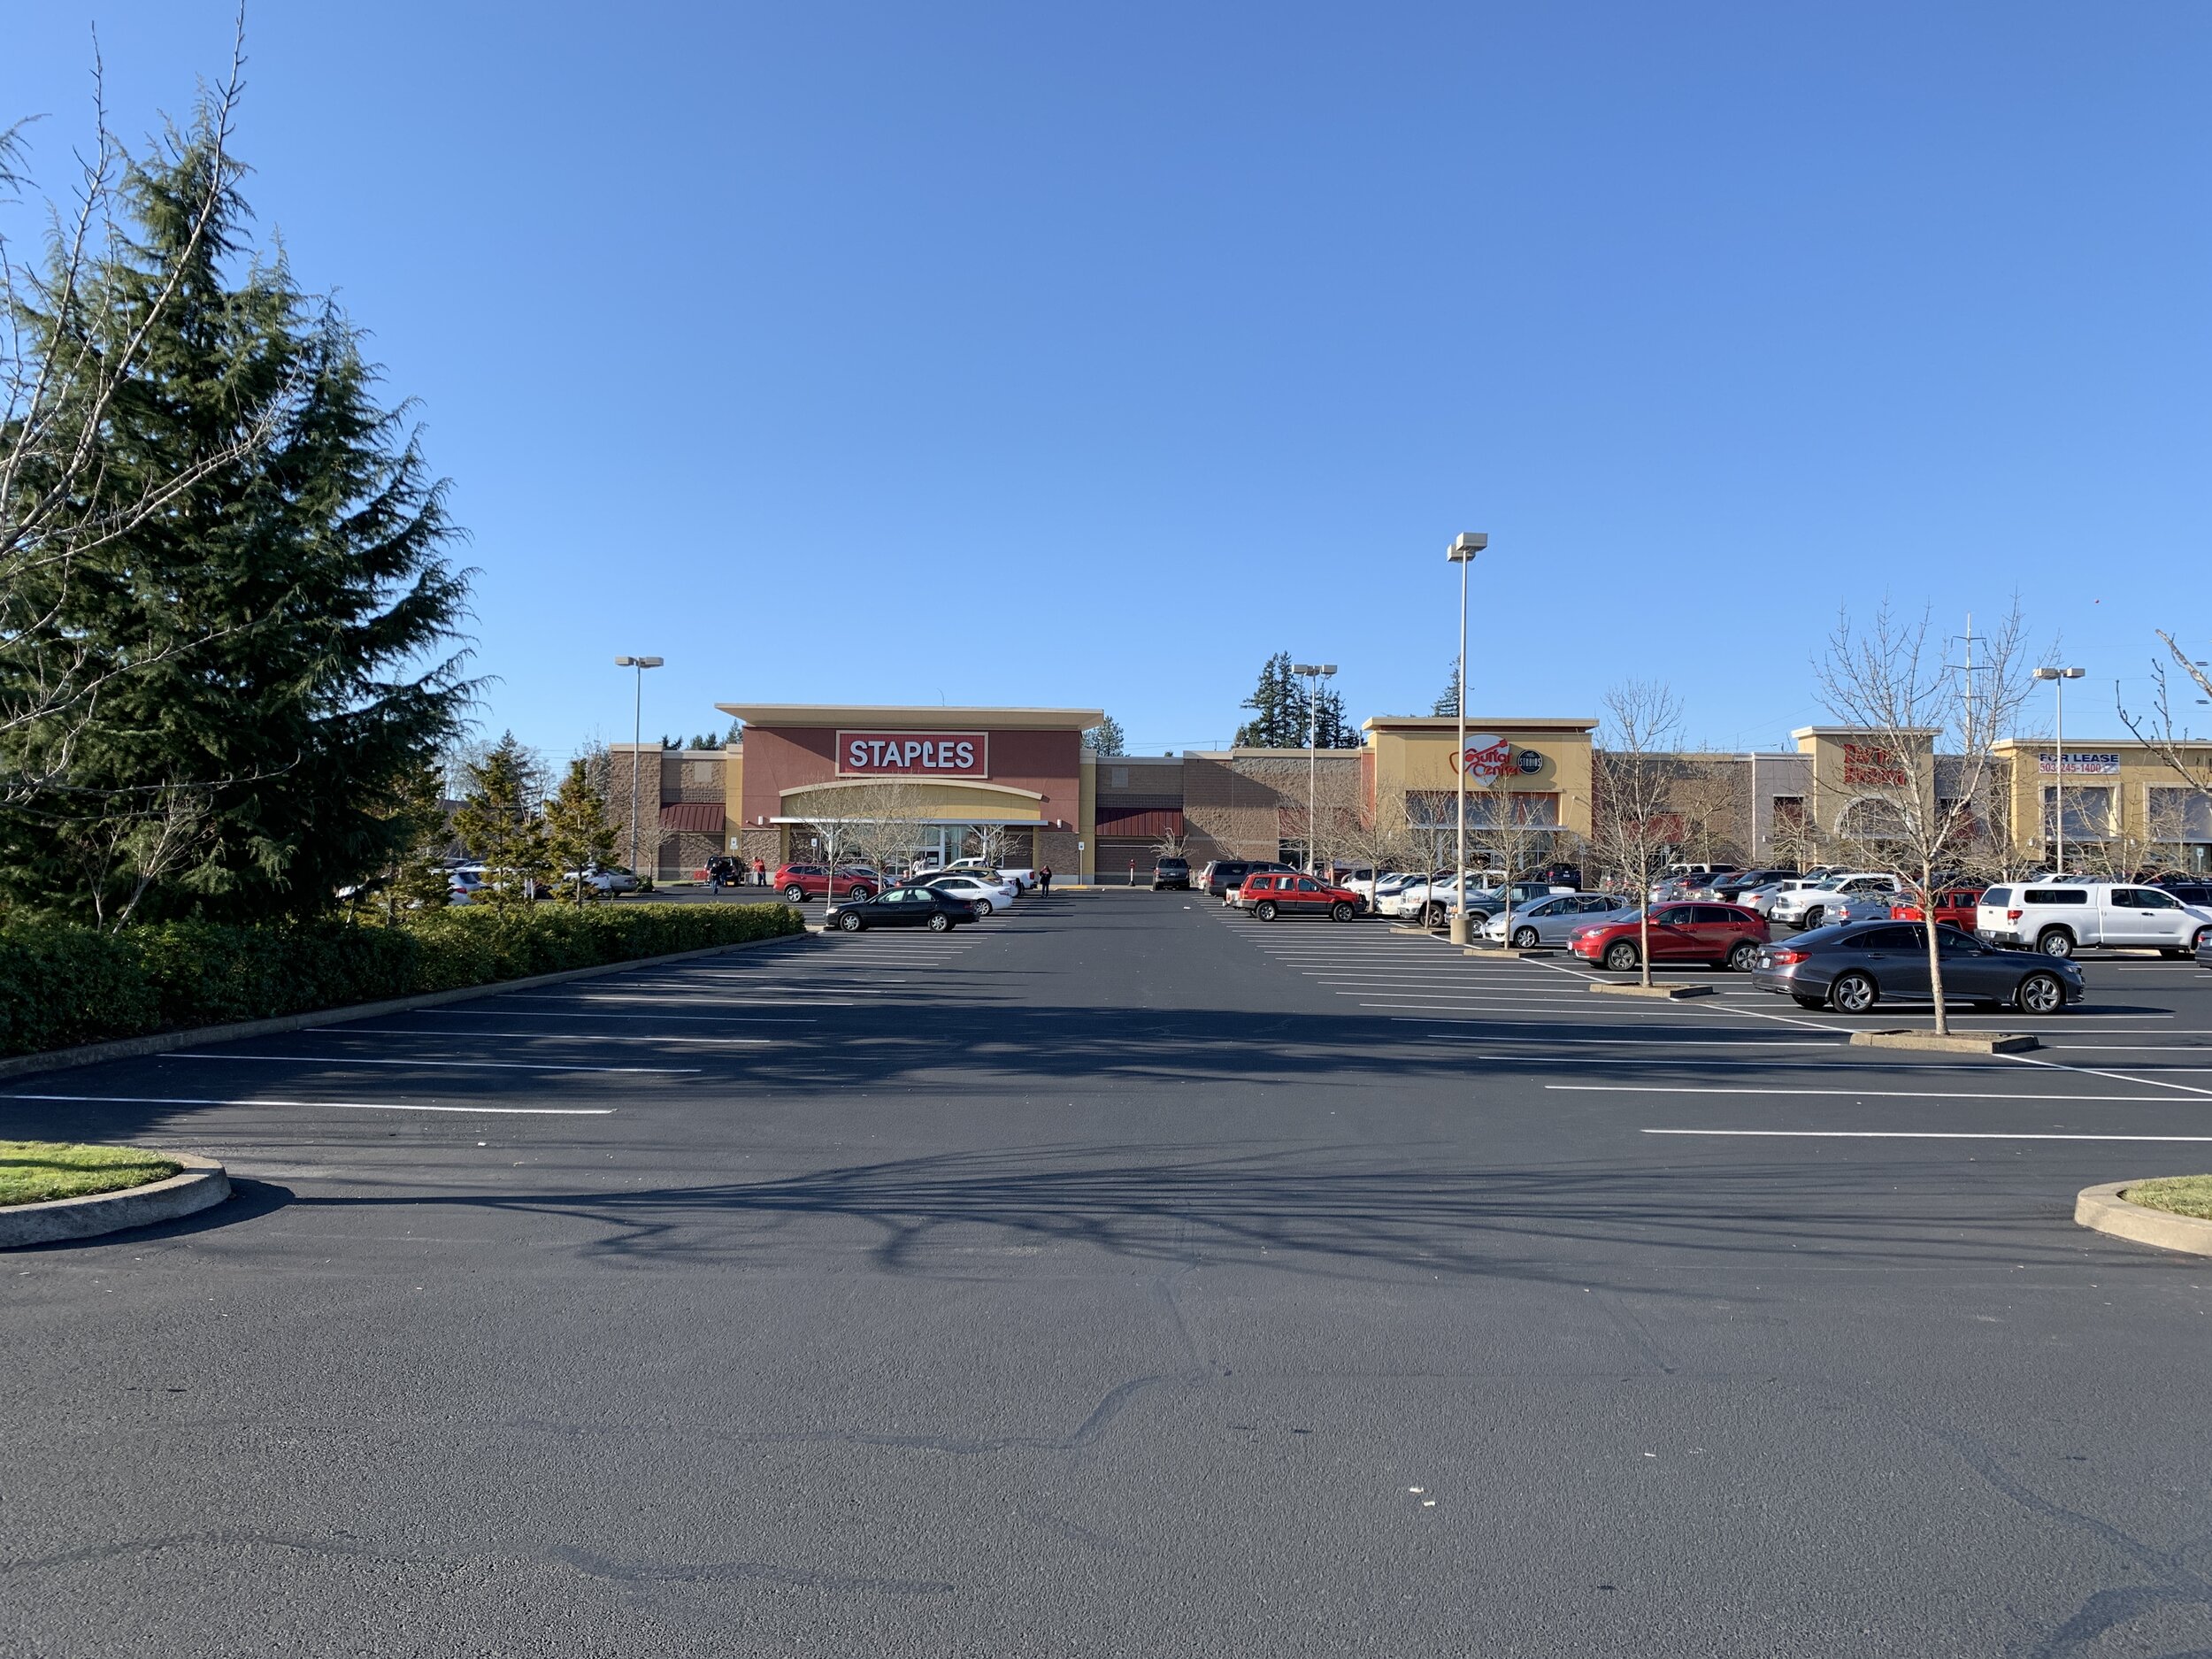 So Many Shoppers, So Much Unused Parking